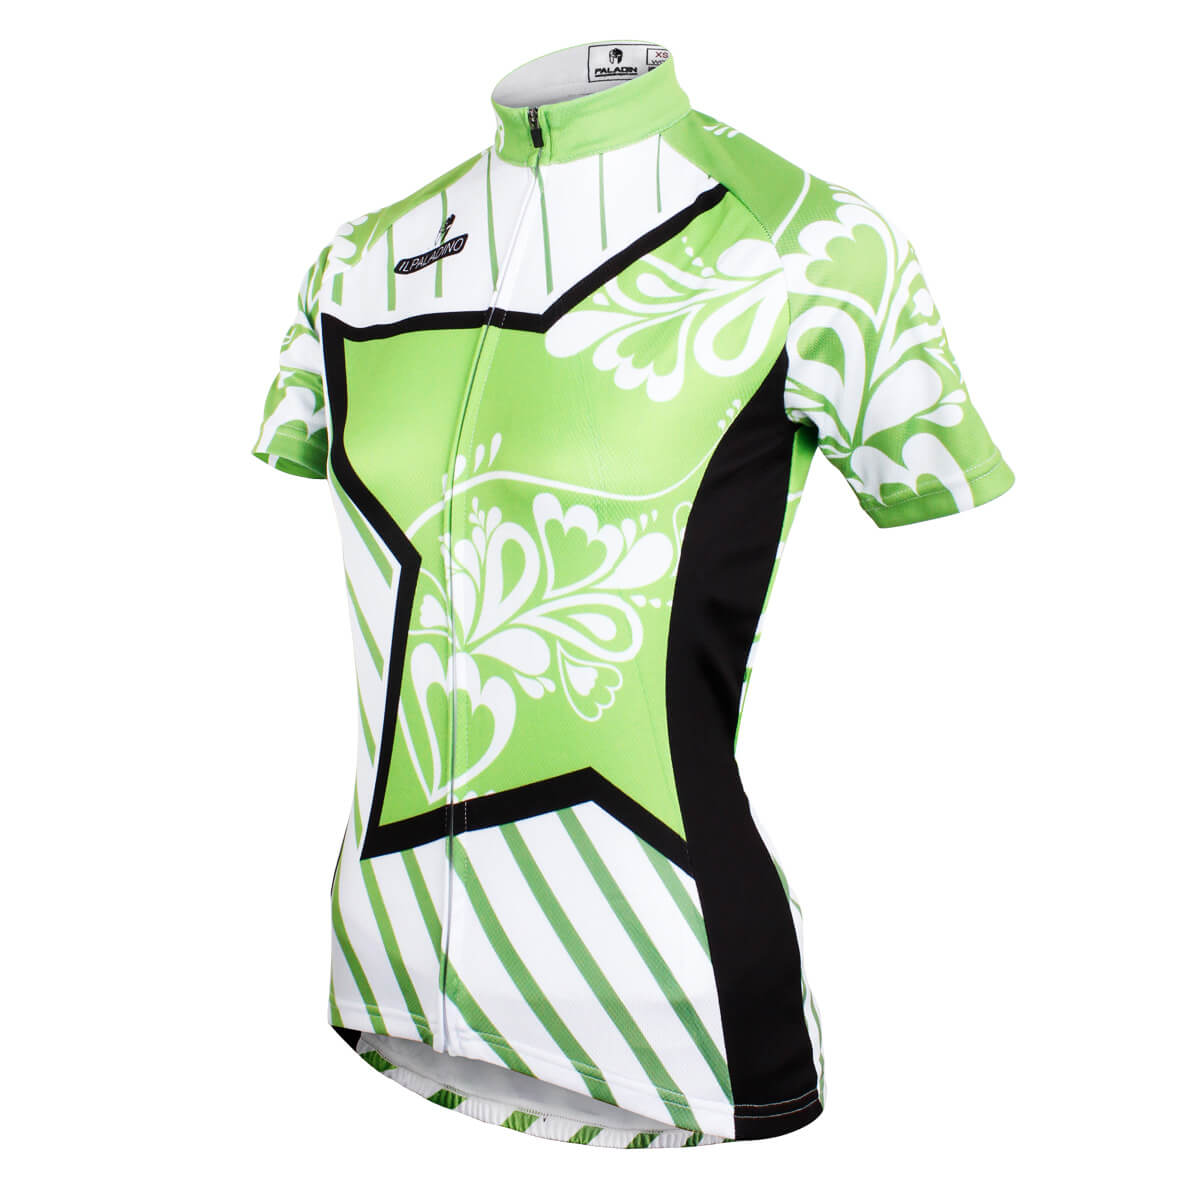 Five-pointed Star Diagonal Stripes Green Cycling Jerseys For Women ...